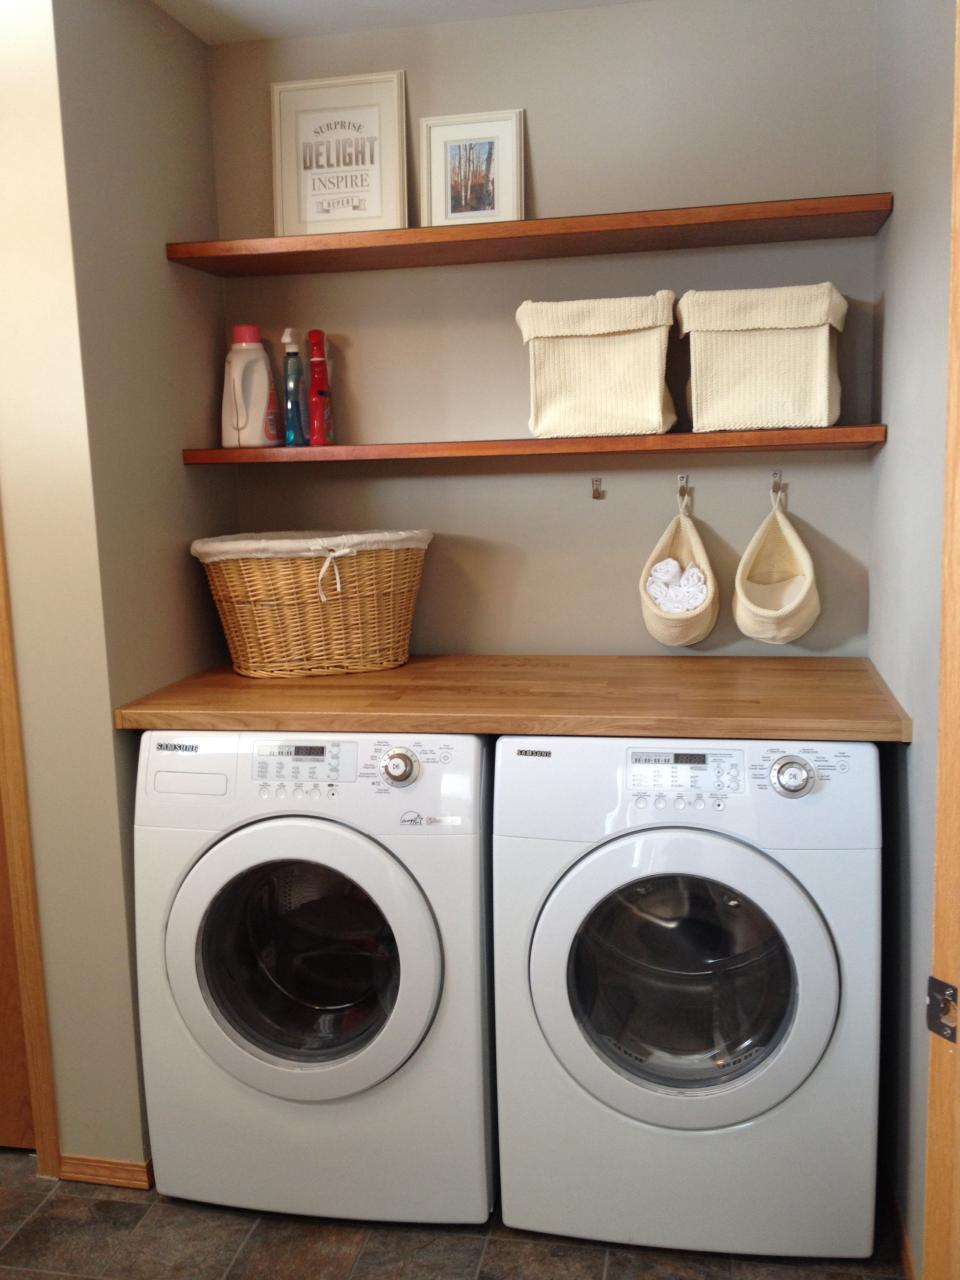 Laundry Room Storage Ideas Ikea Shelves For American / The 25+ best